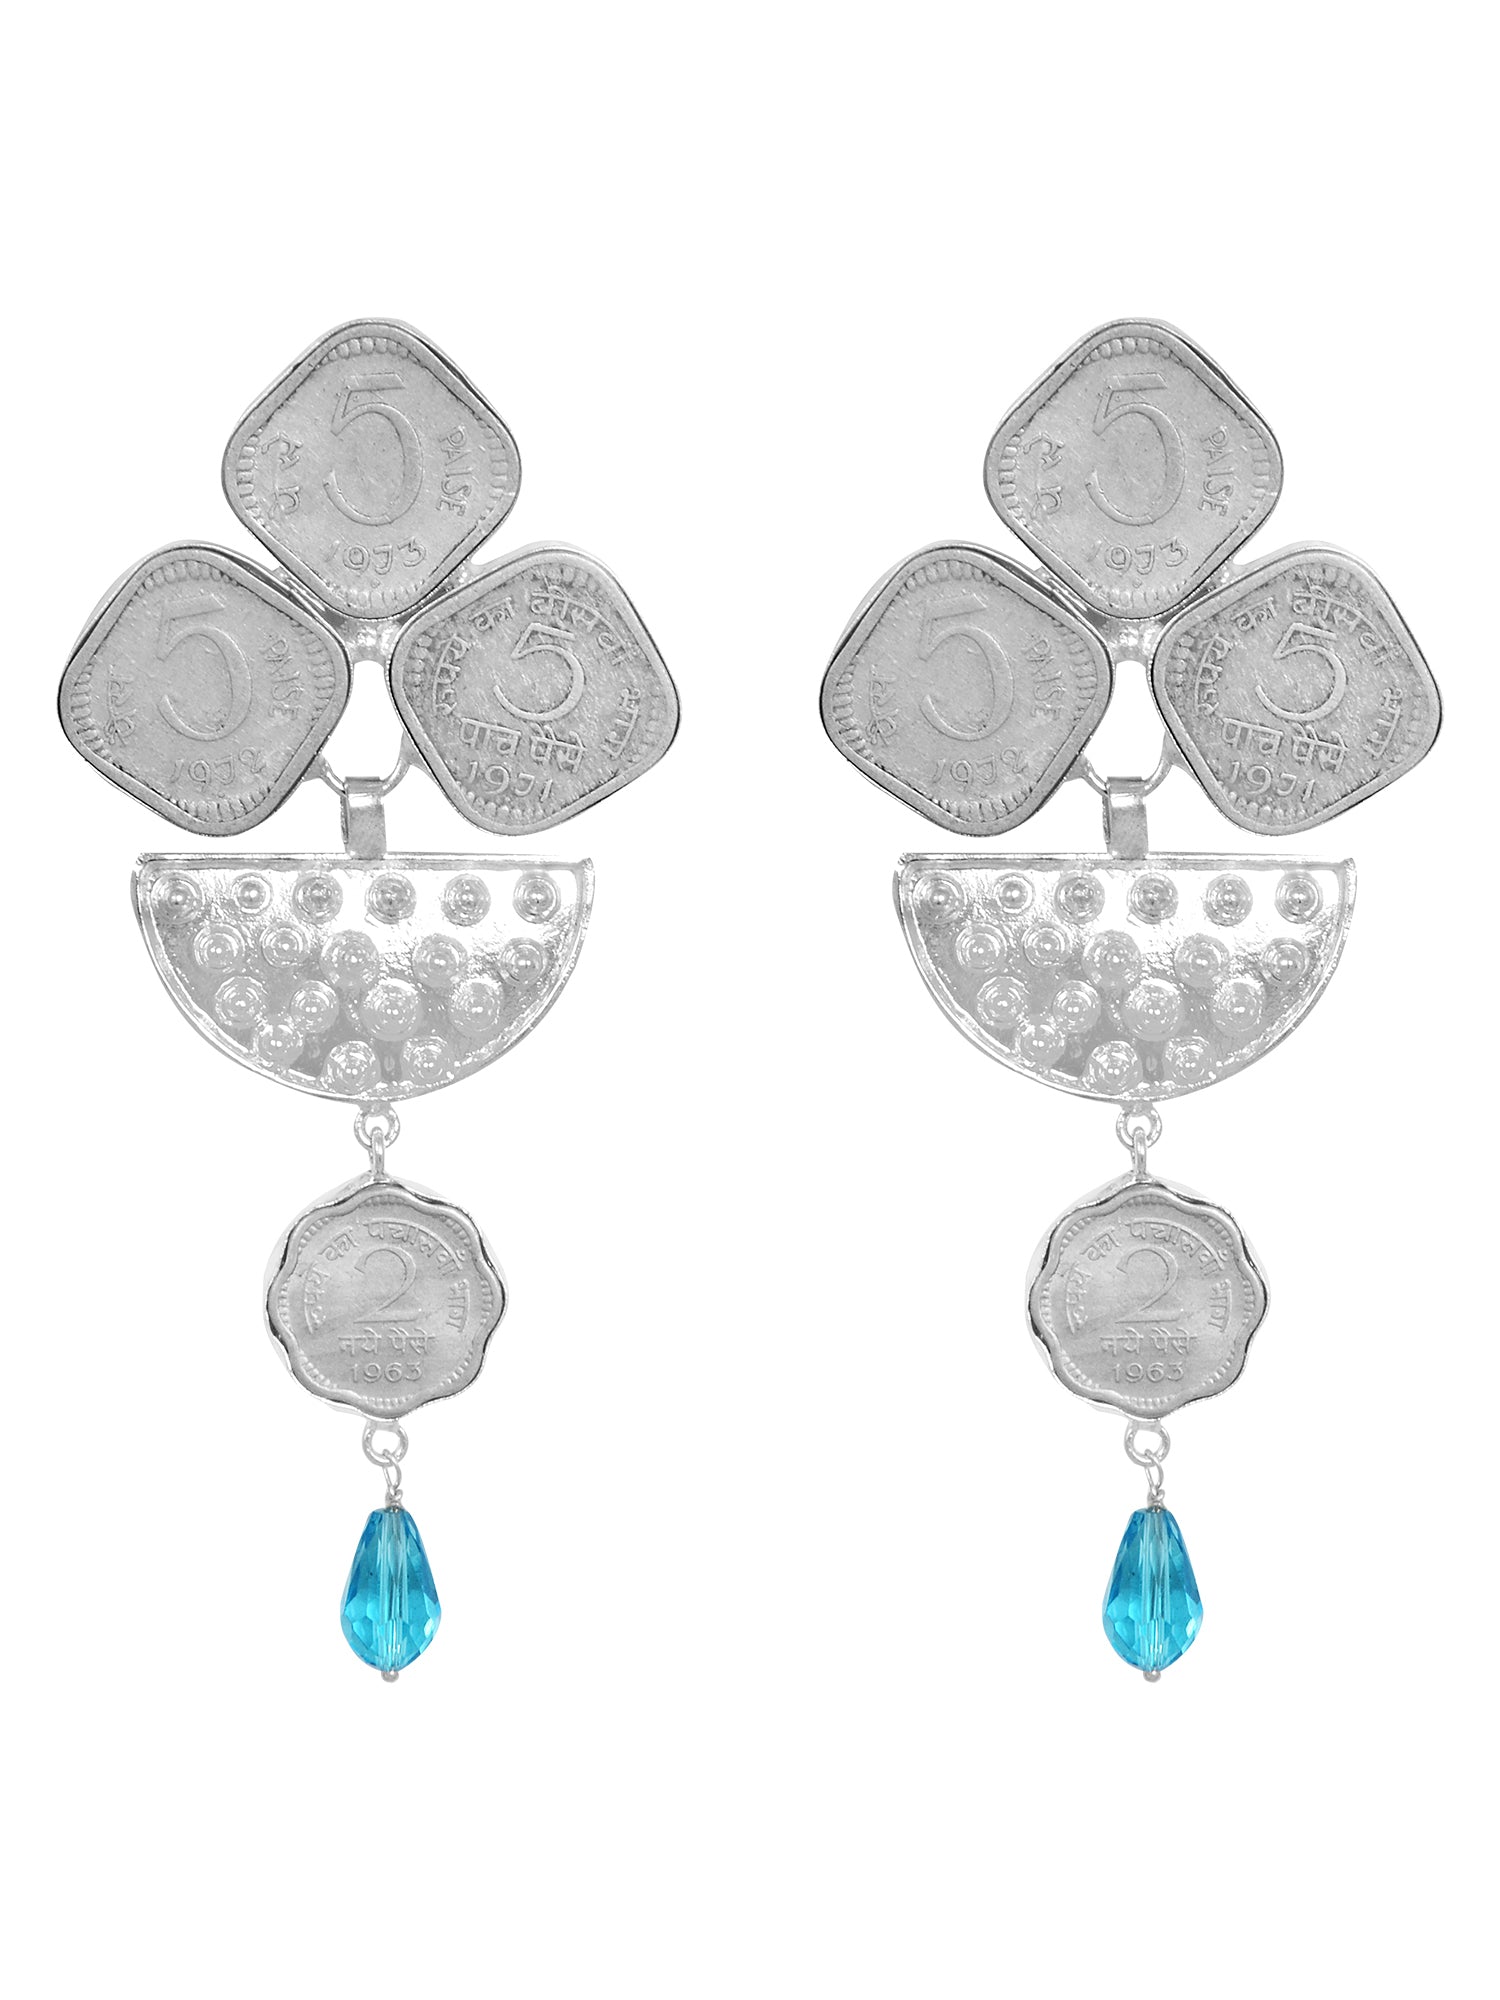 Vintage 5 paisa Collection Earrings